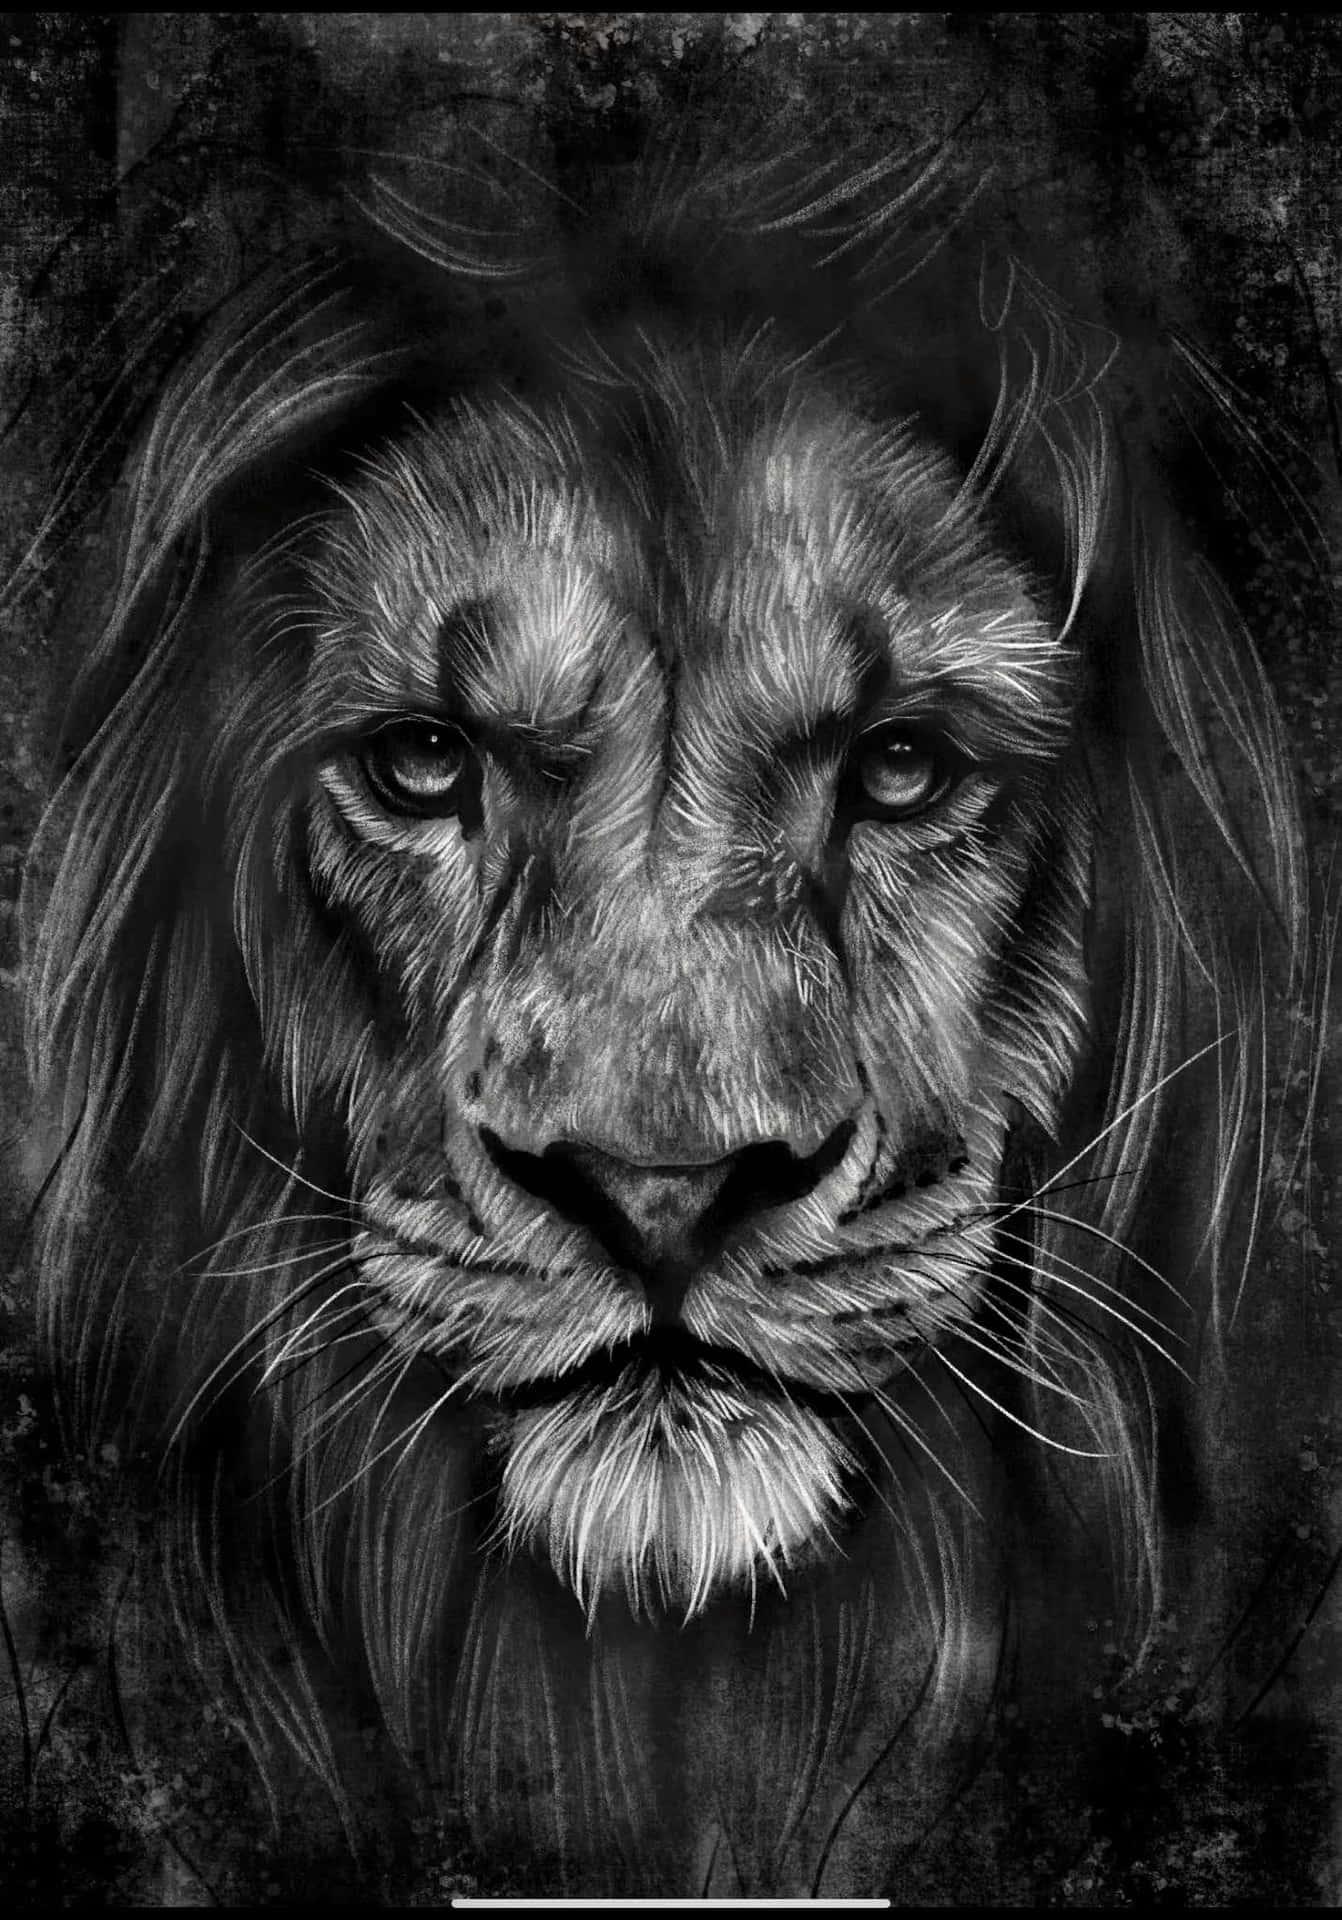 A Black And White Drawing Of A Lion